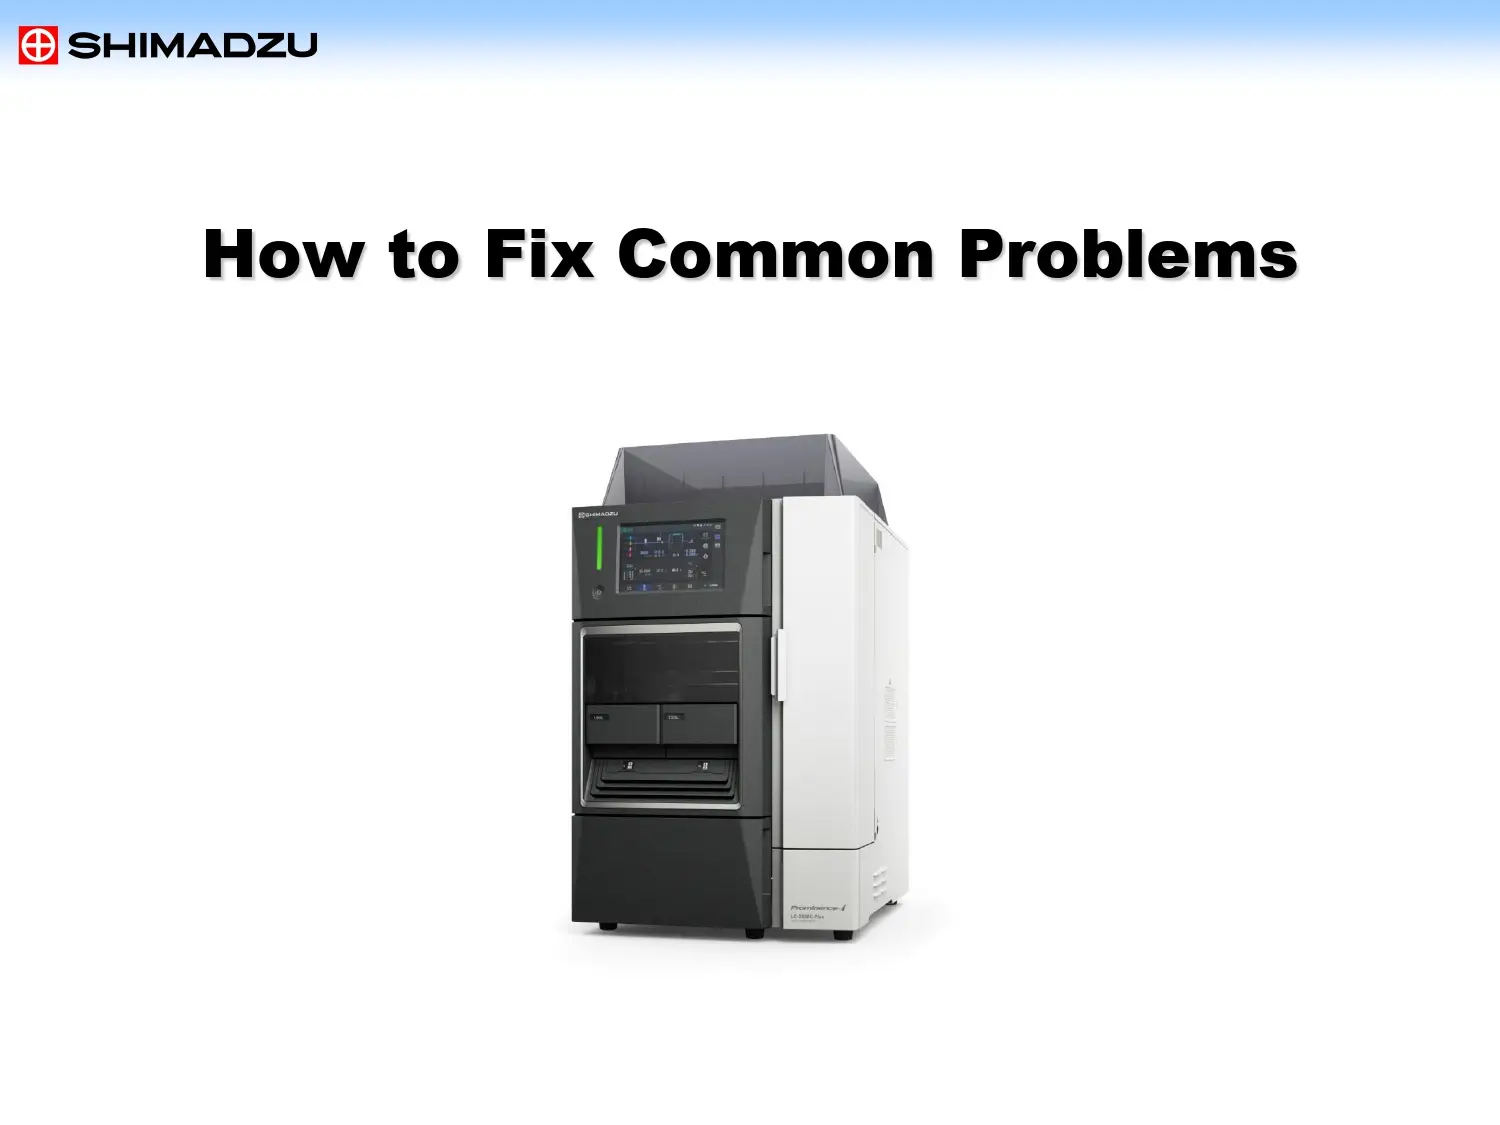 How to Fix Common Problems